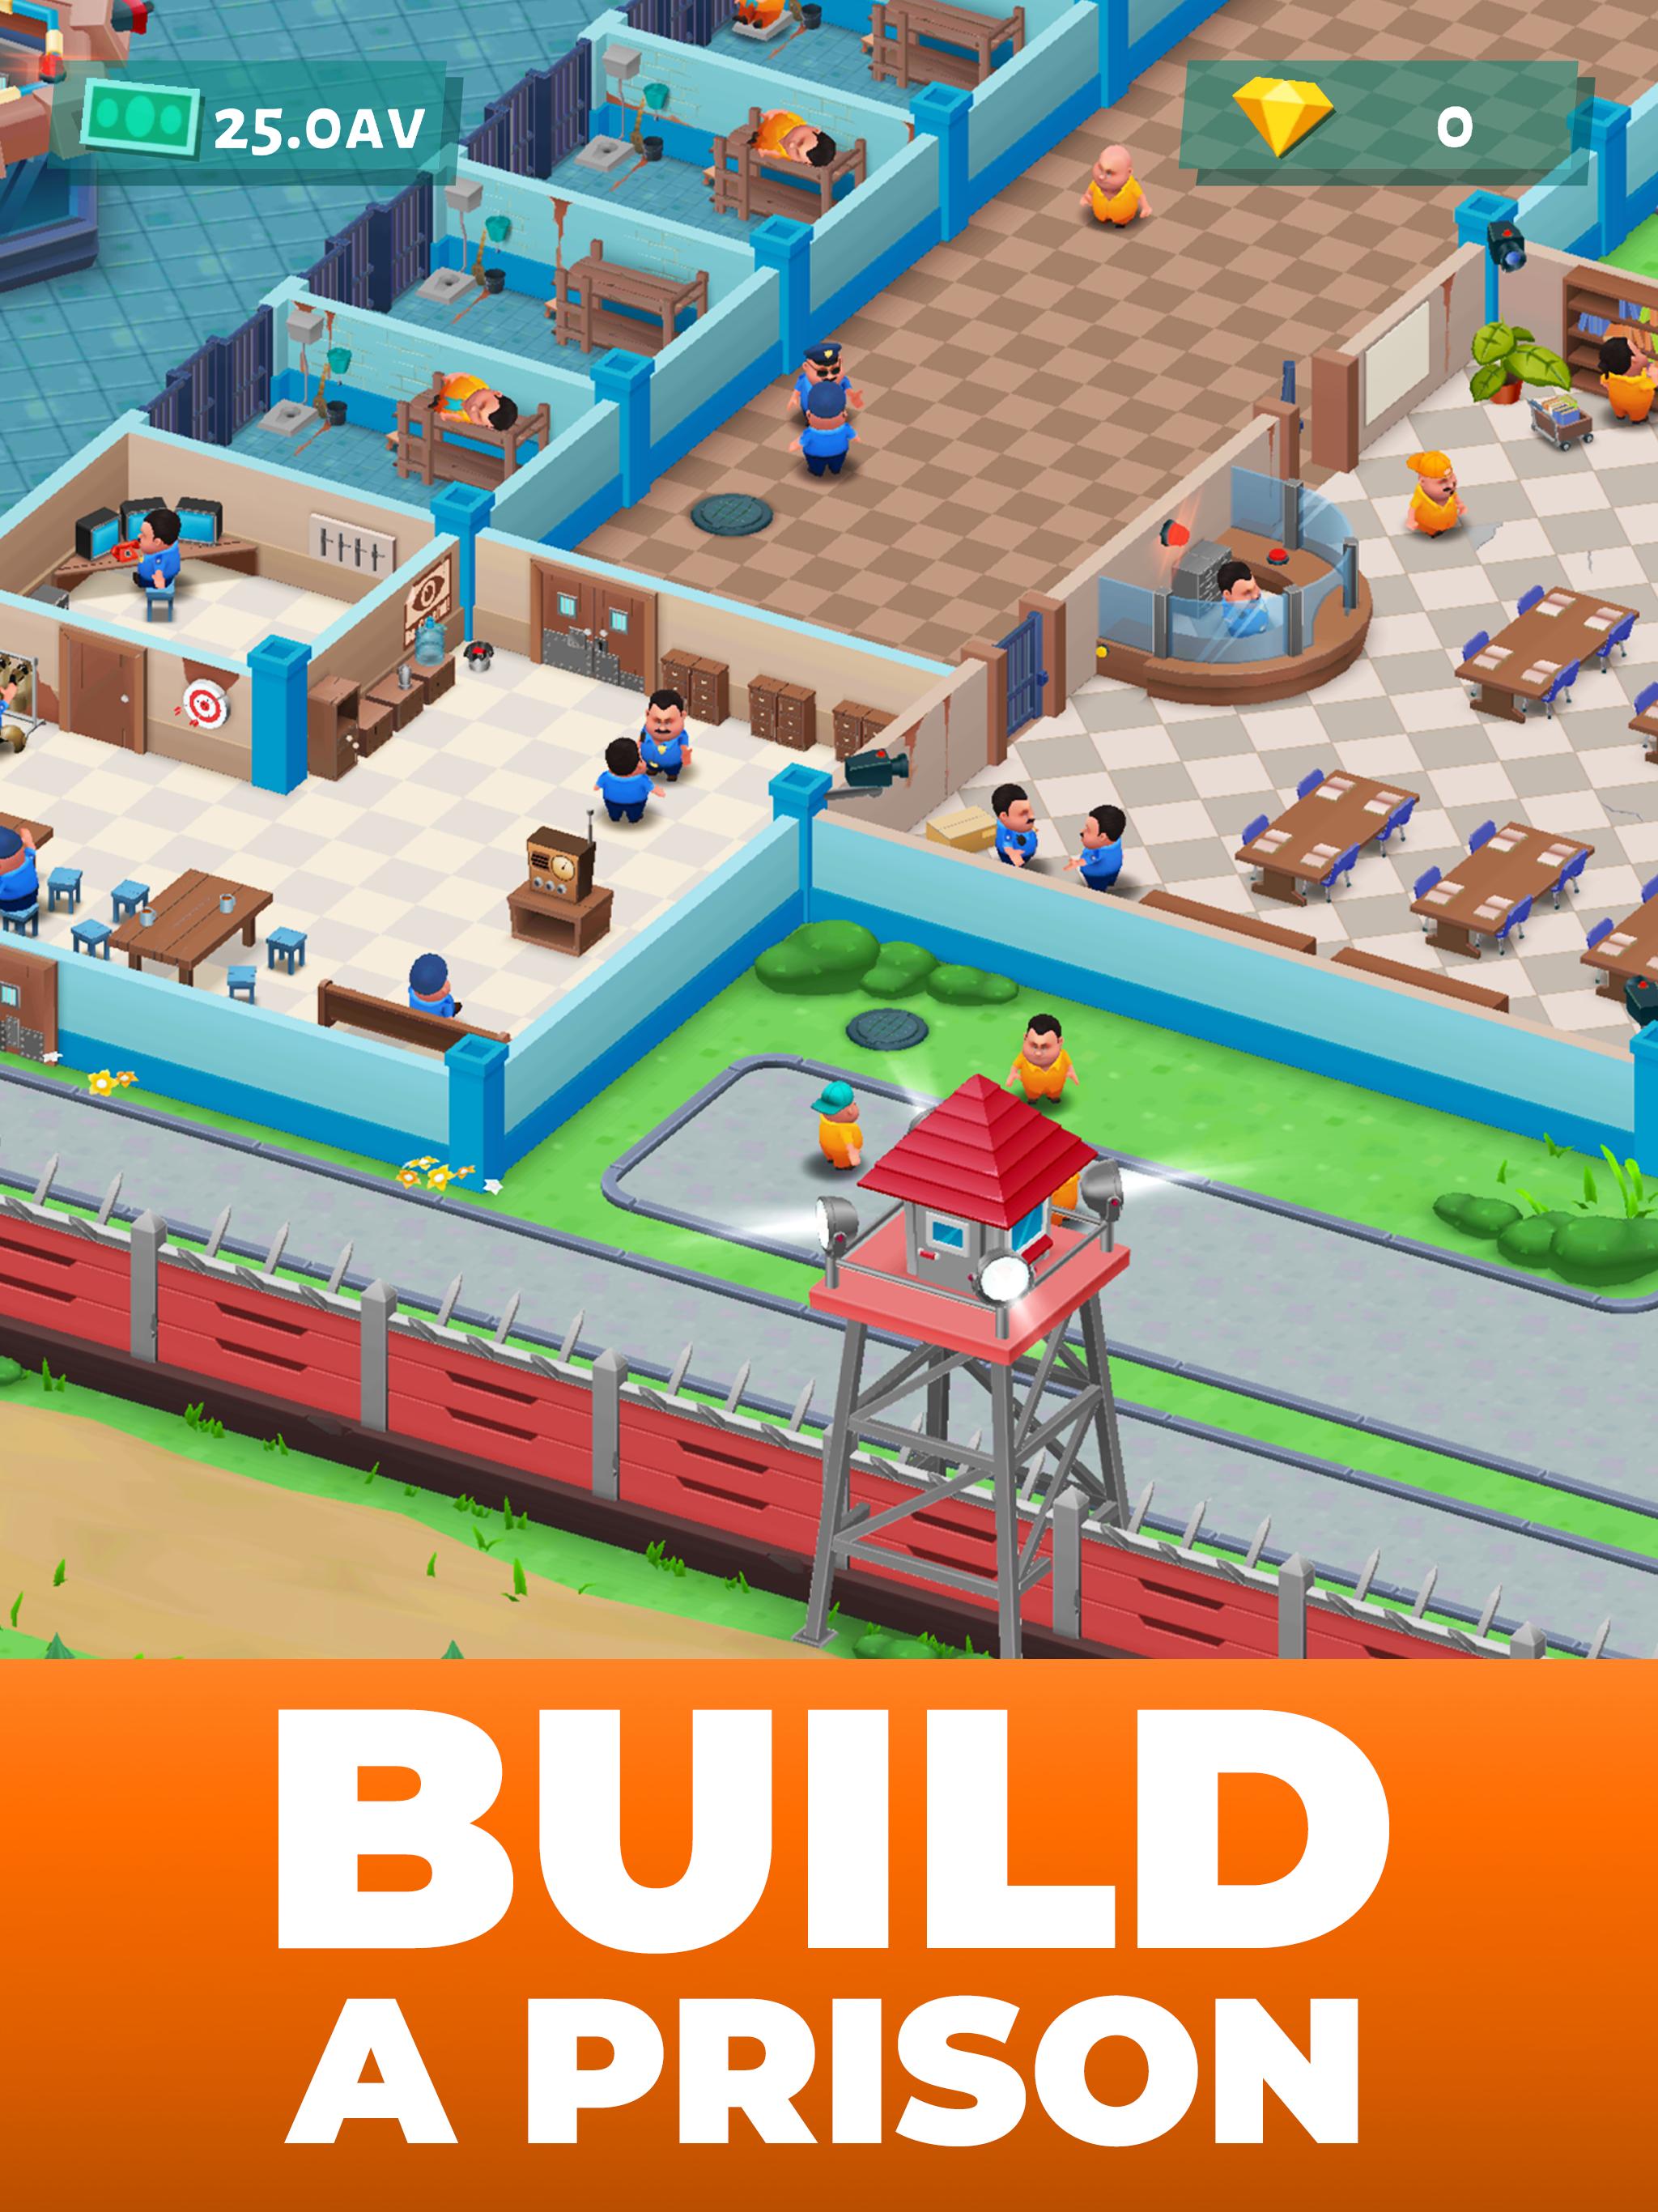 Idle Prison Tycoon Business Manager 0.6 Screenshot 6